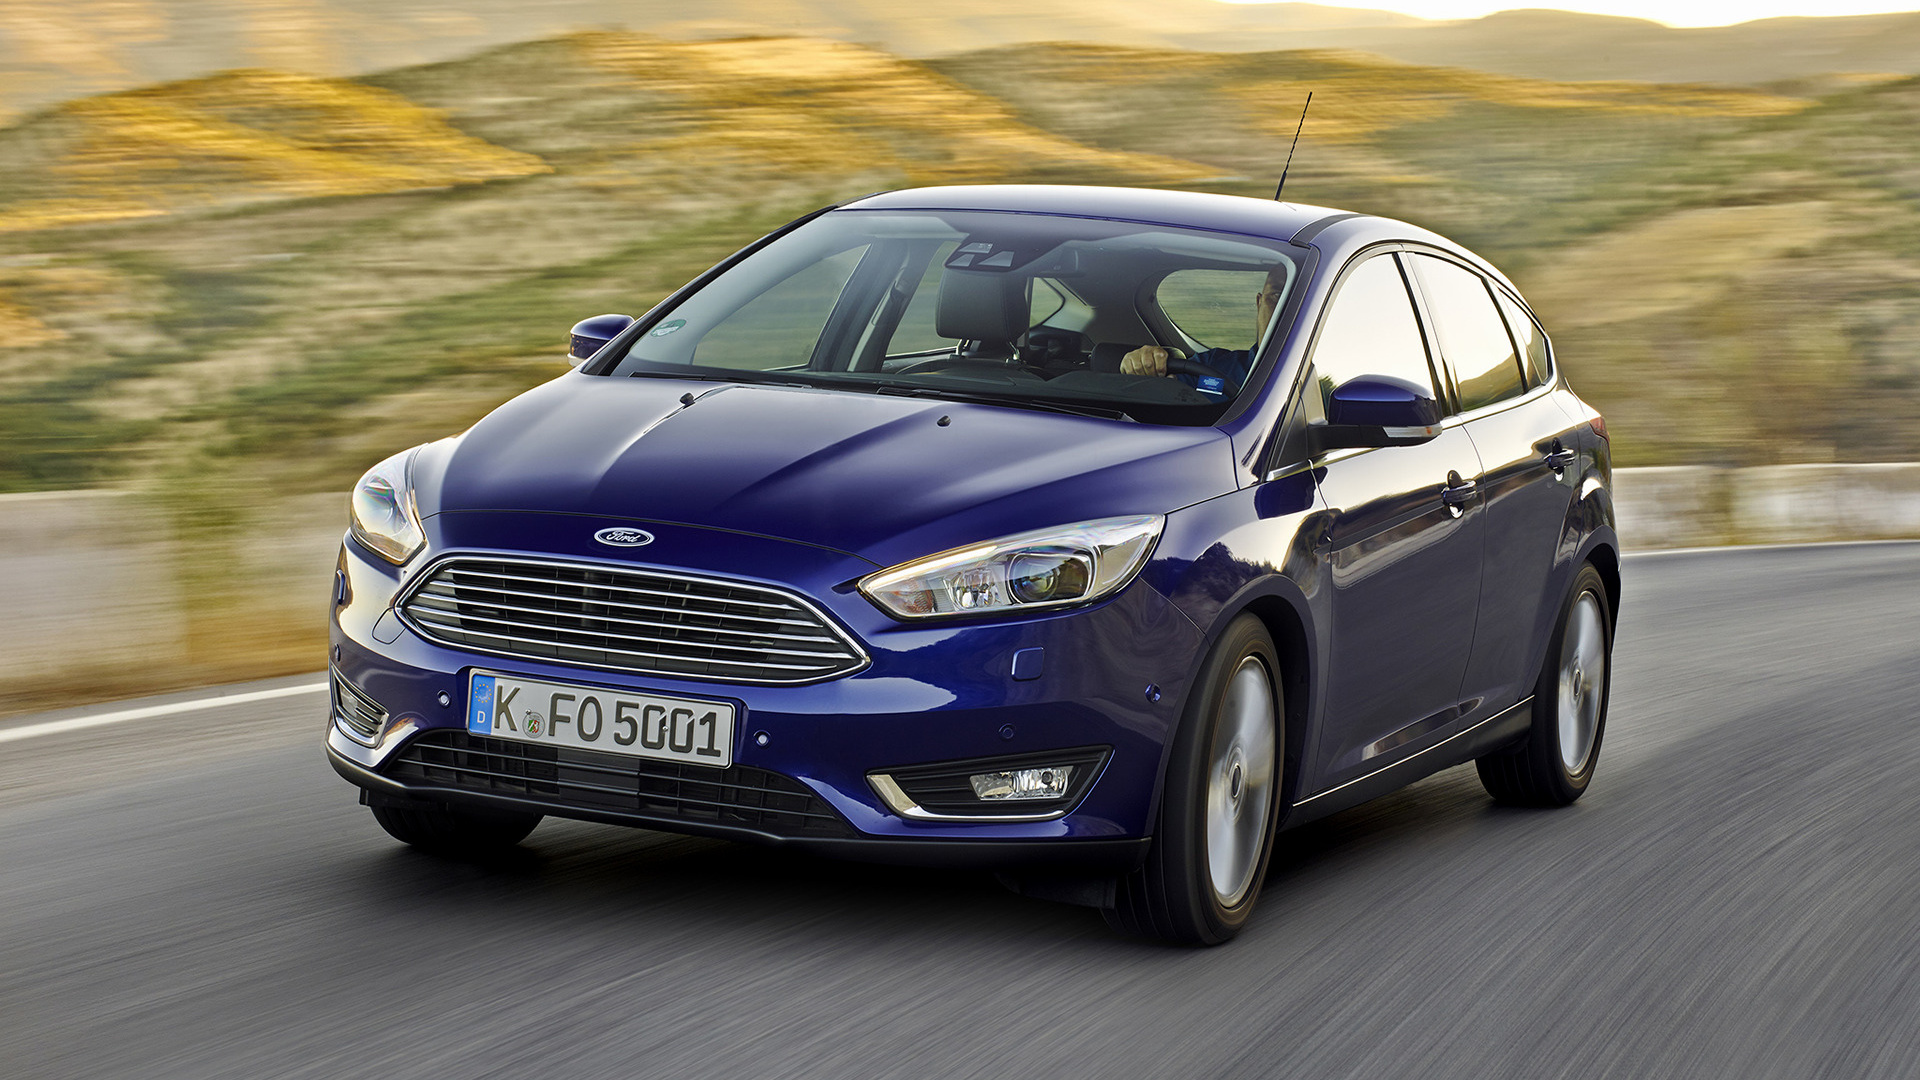 2014 Ford Focus - Wallpapers and HD Images | Car Pixel